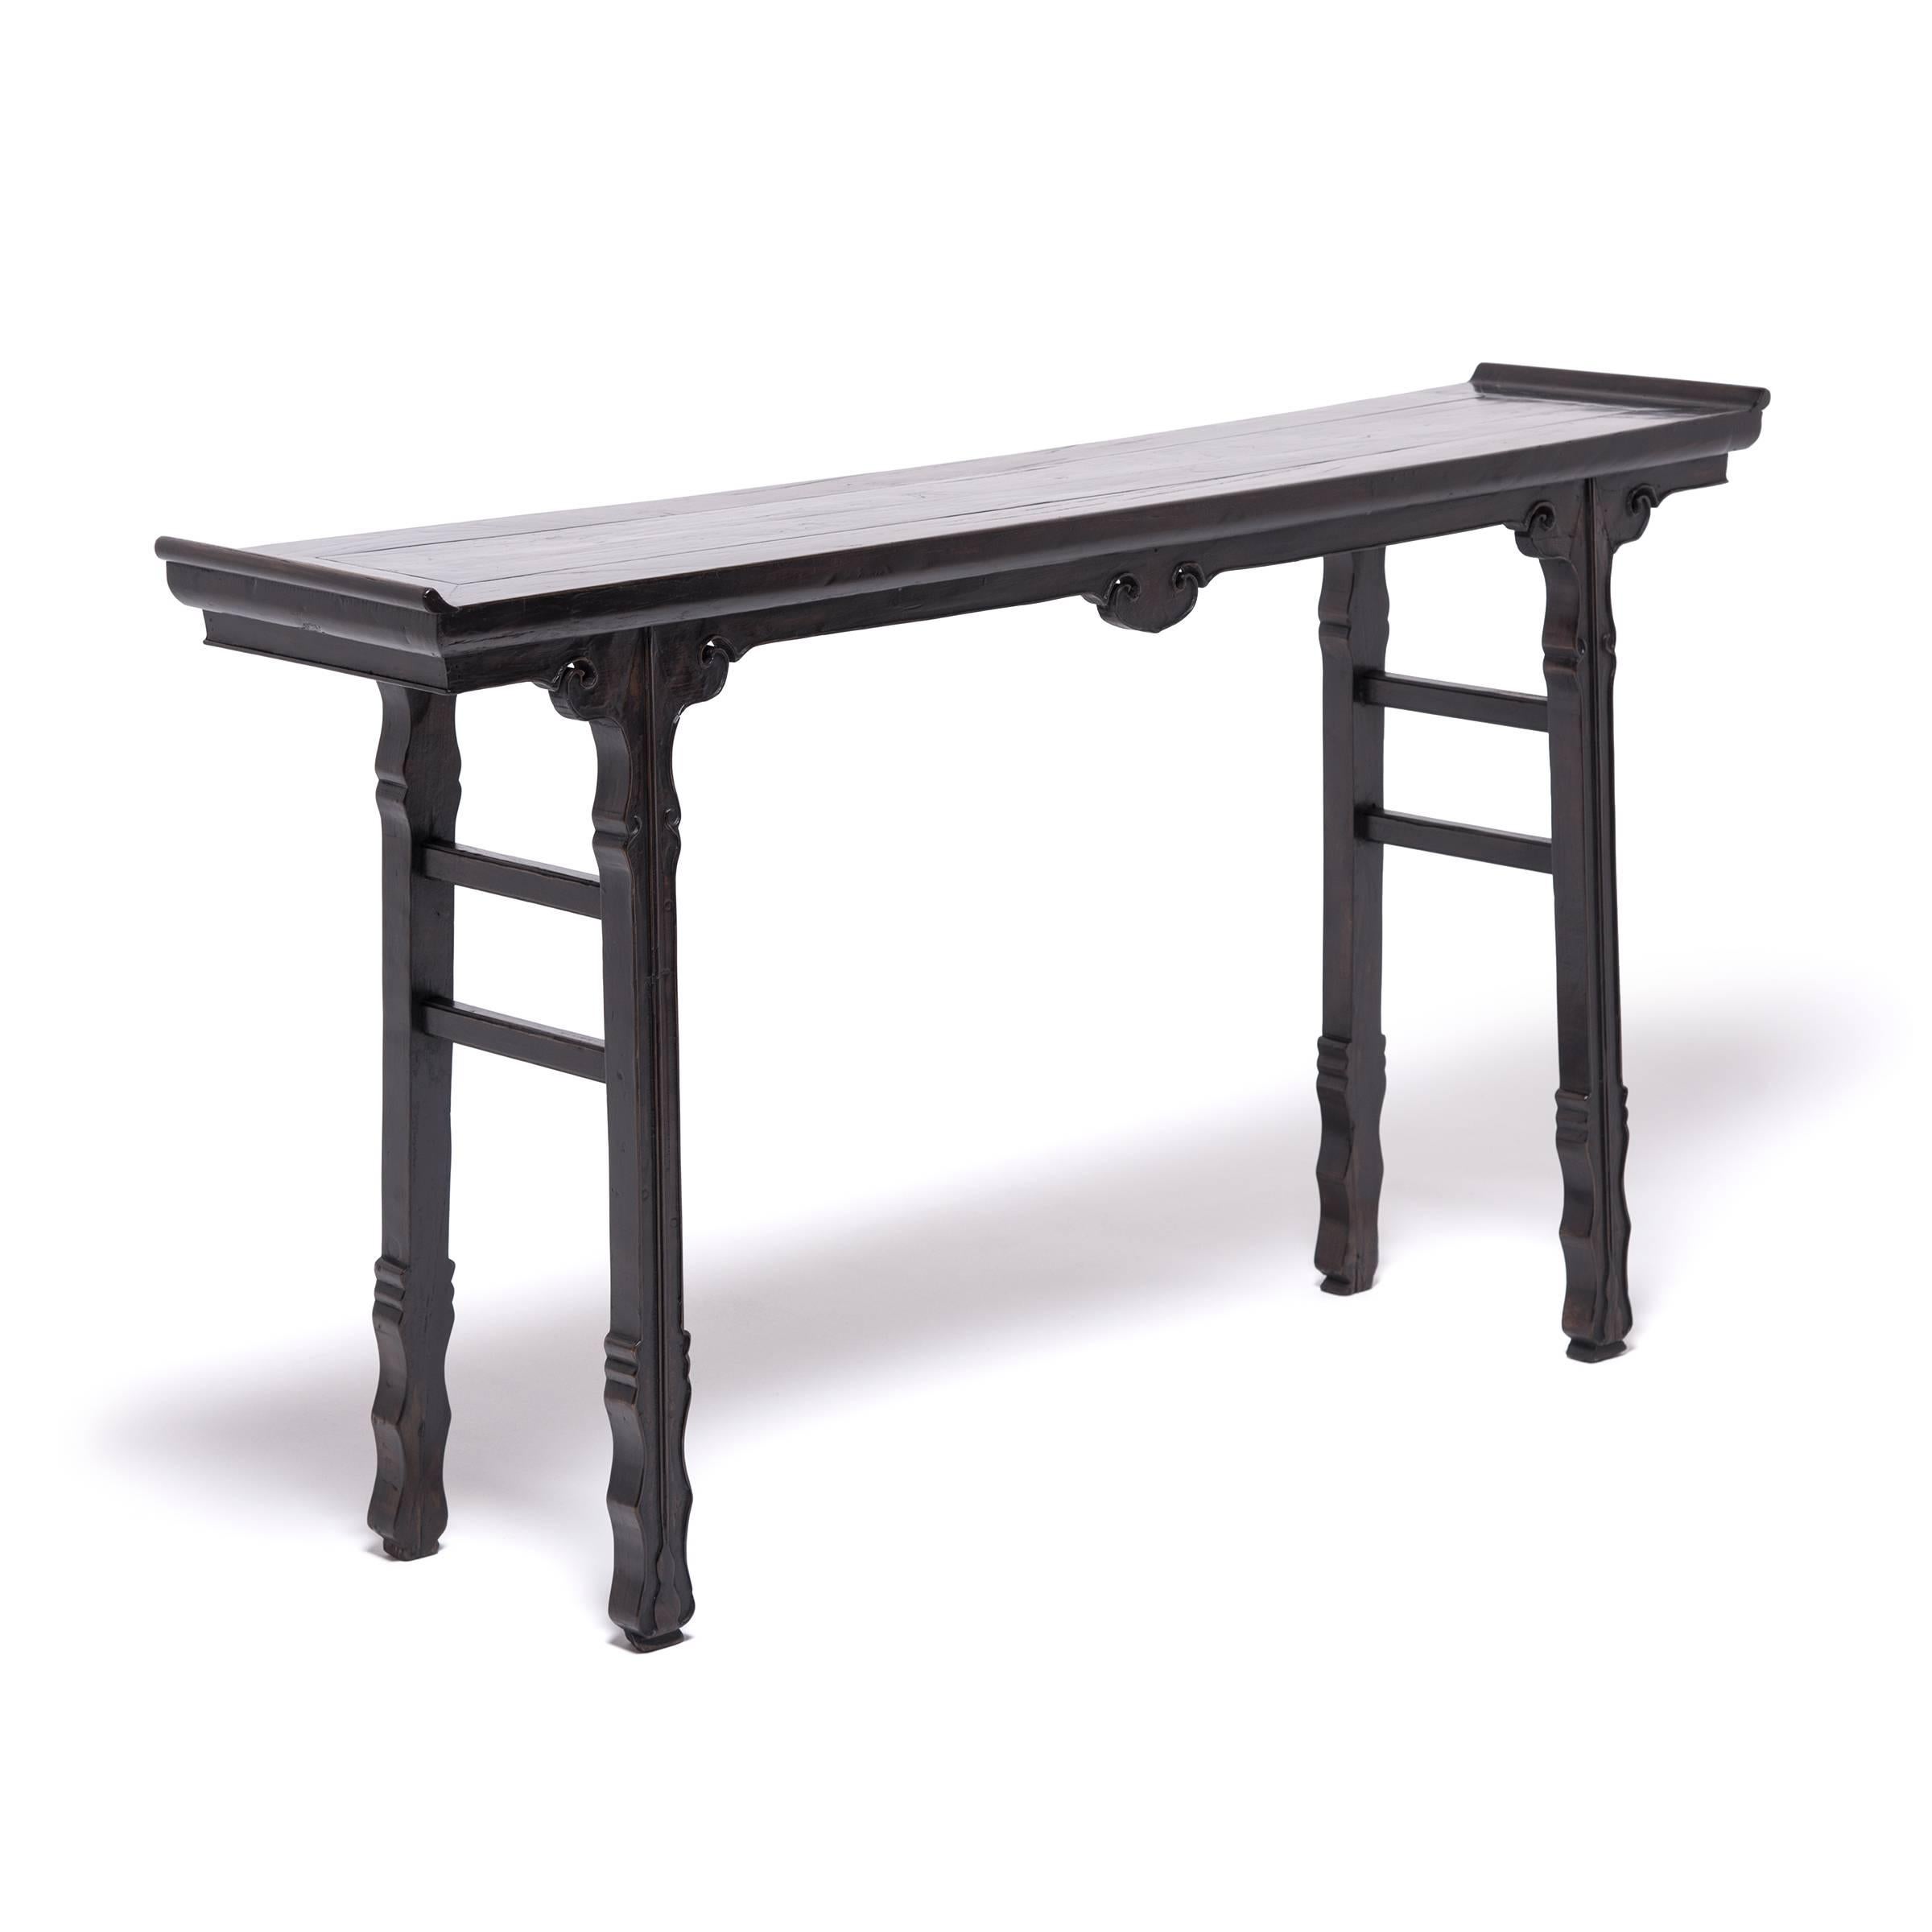 A black lacquer finish brings out the beautiful Silhouette of this elegant Qing-dynasty altar table once used to hold incense, offerings and portraits honoring ancestors. Skillfully constructed without nails or screws, this beautifully proportioned